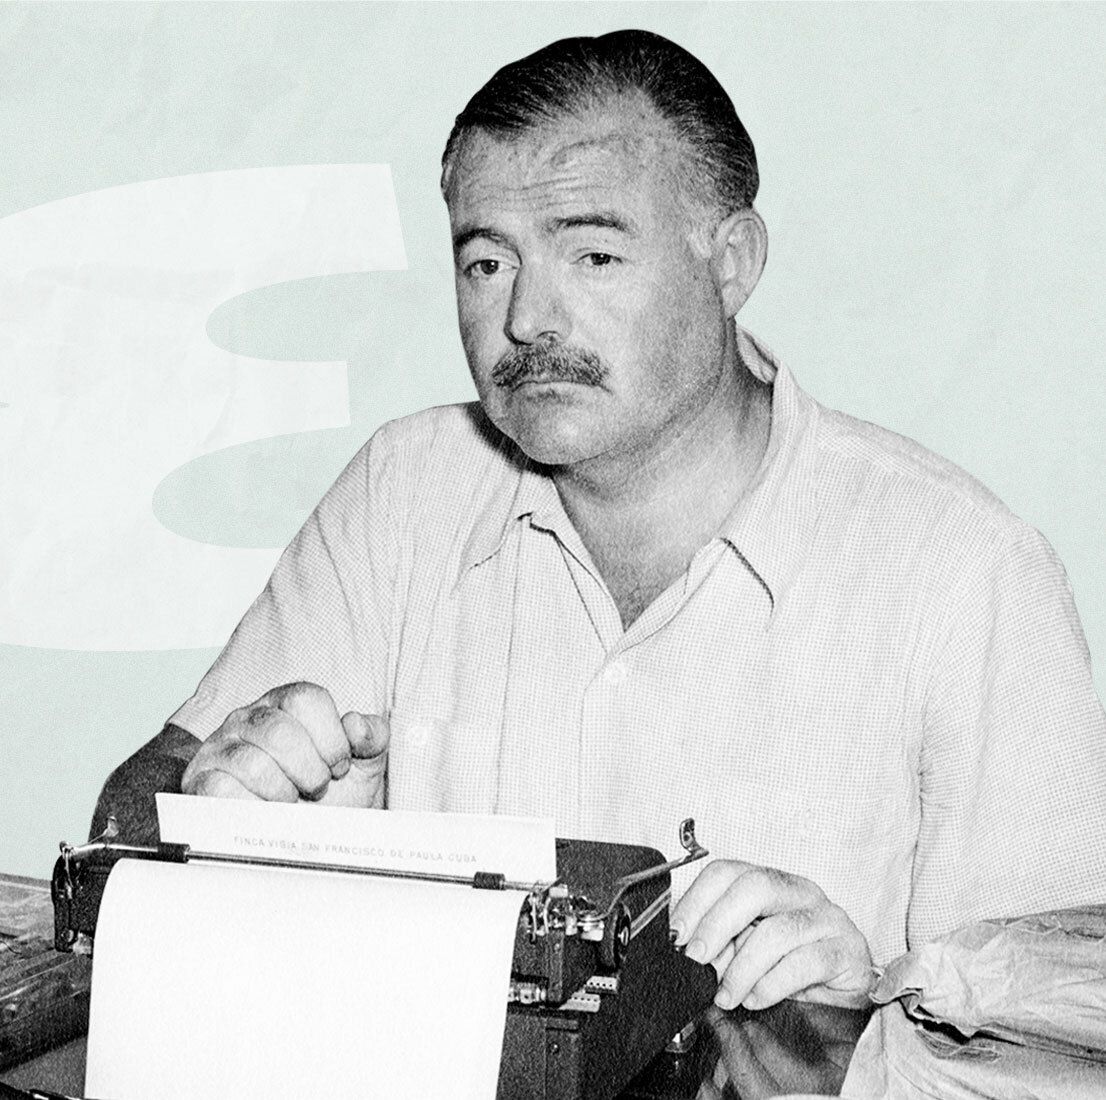 Shooting Contests, Love Triangles, and Feuds: Inside Ernest Hemingway's Years As An Esquire Writer